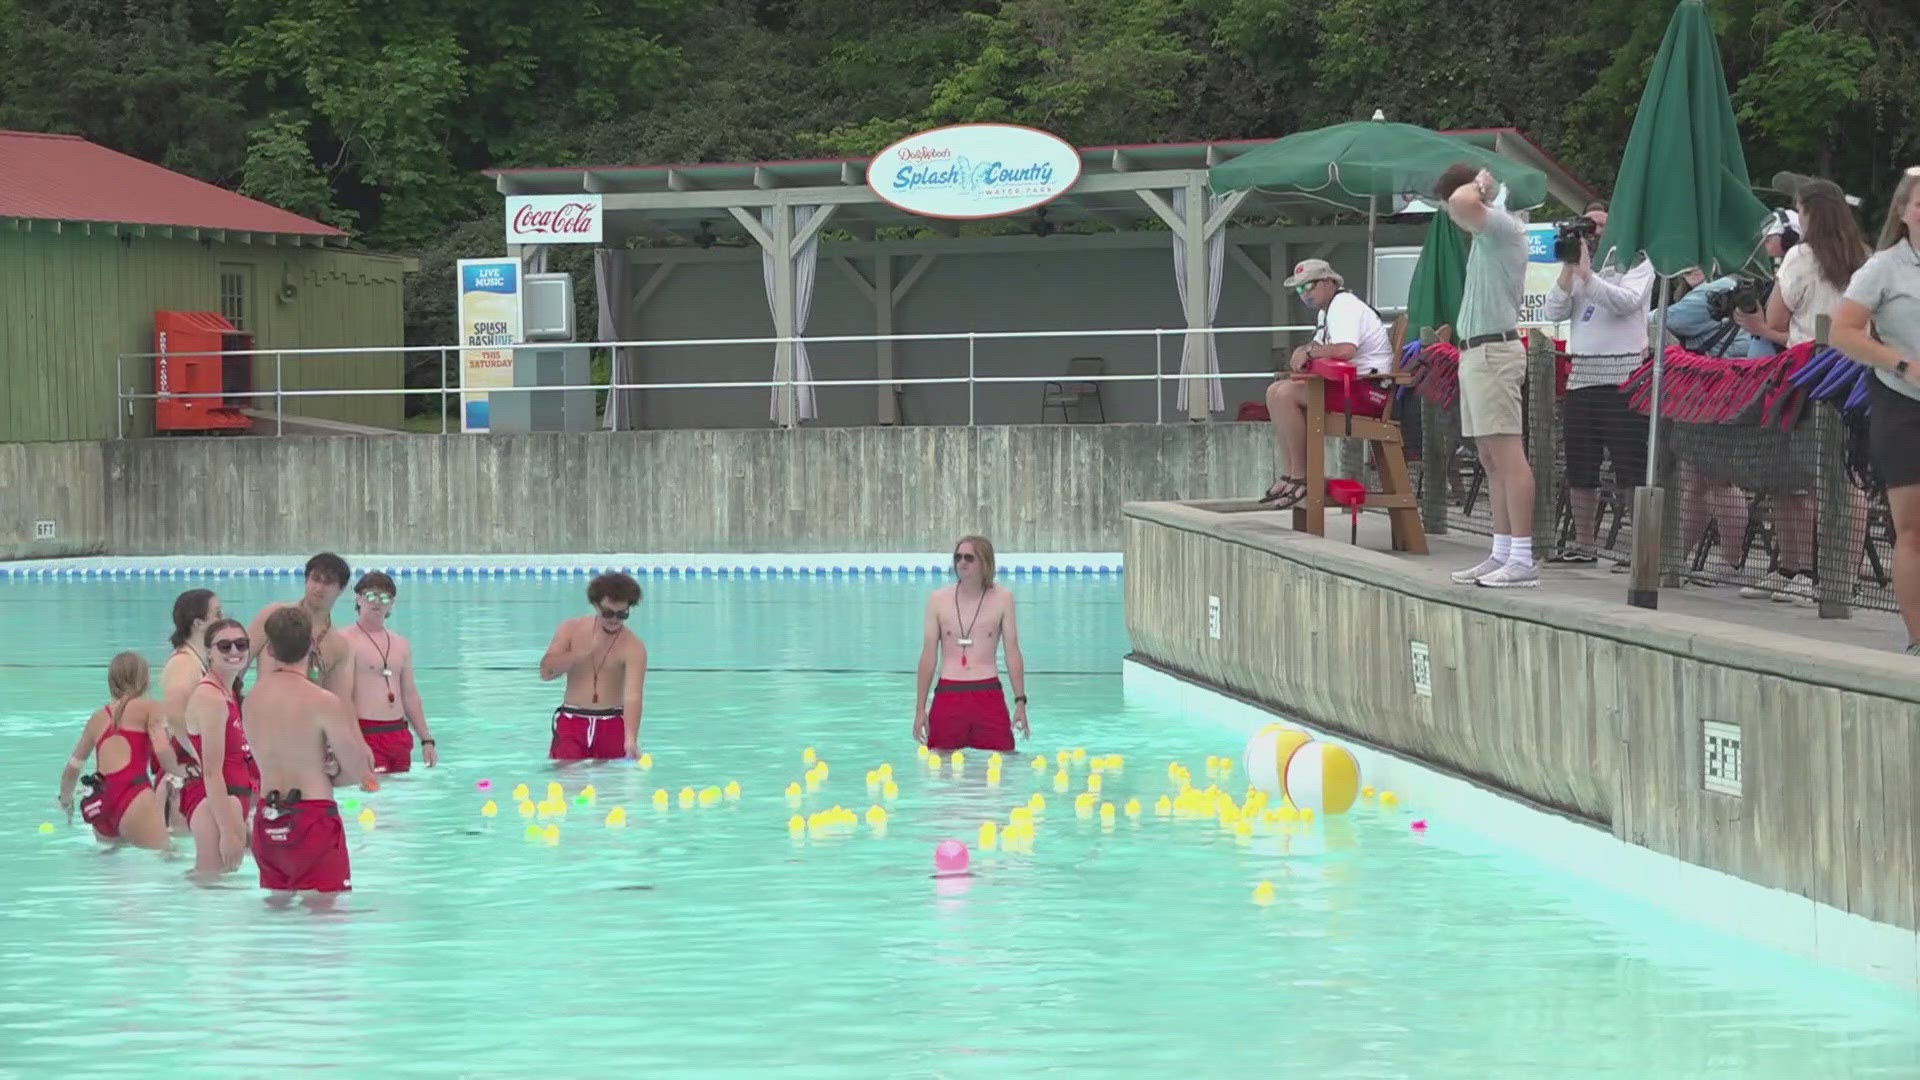 Splash Country's lifeguards, and our very own Katie Inman, got a refresher on how to keep the waters safe.